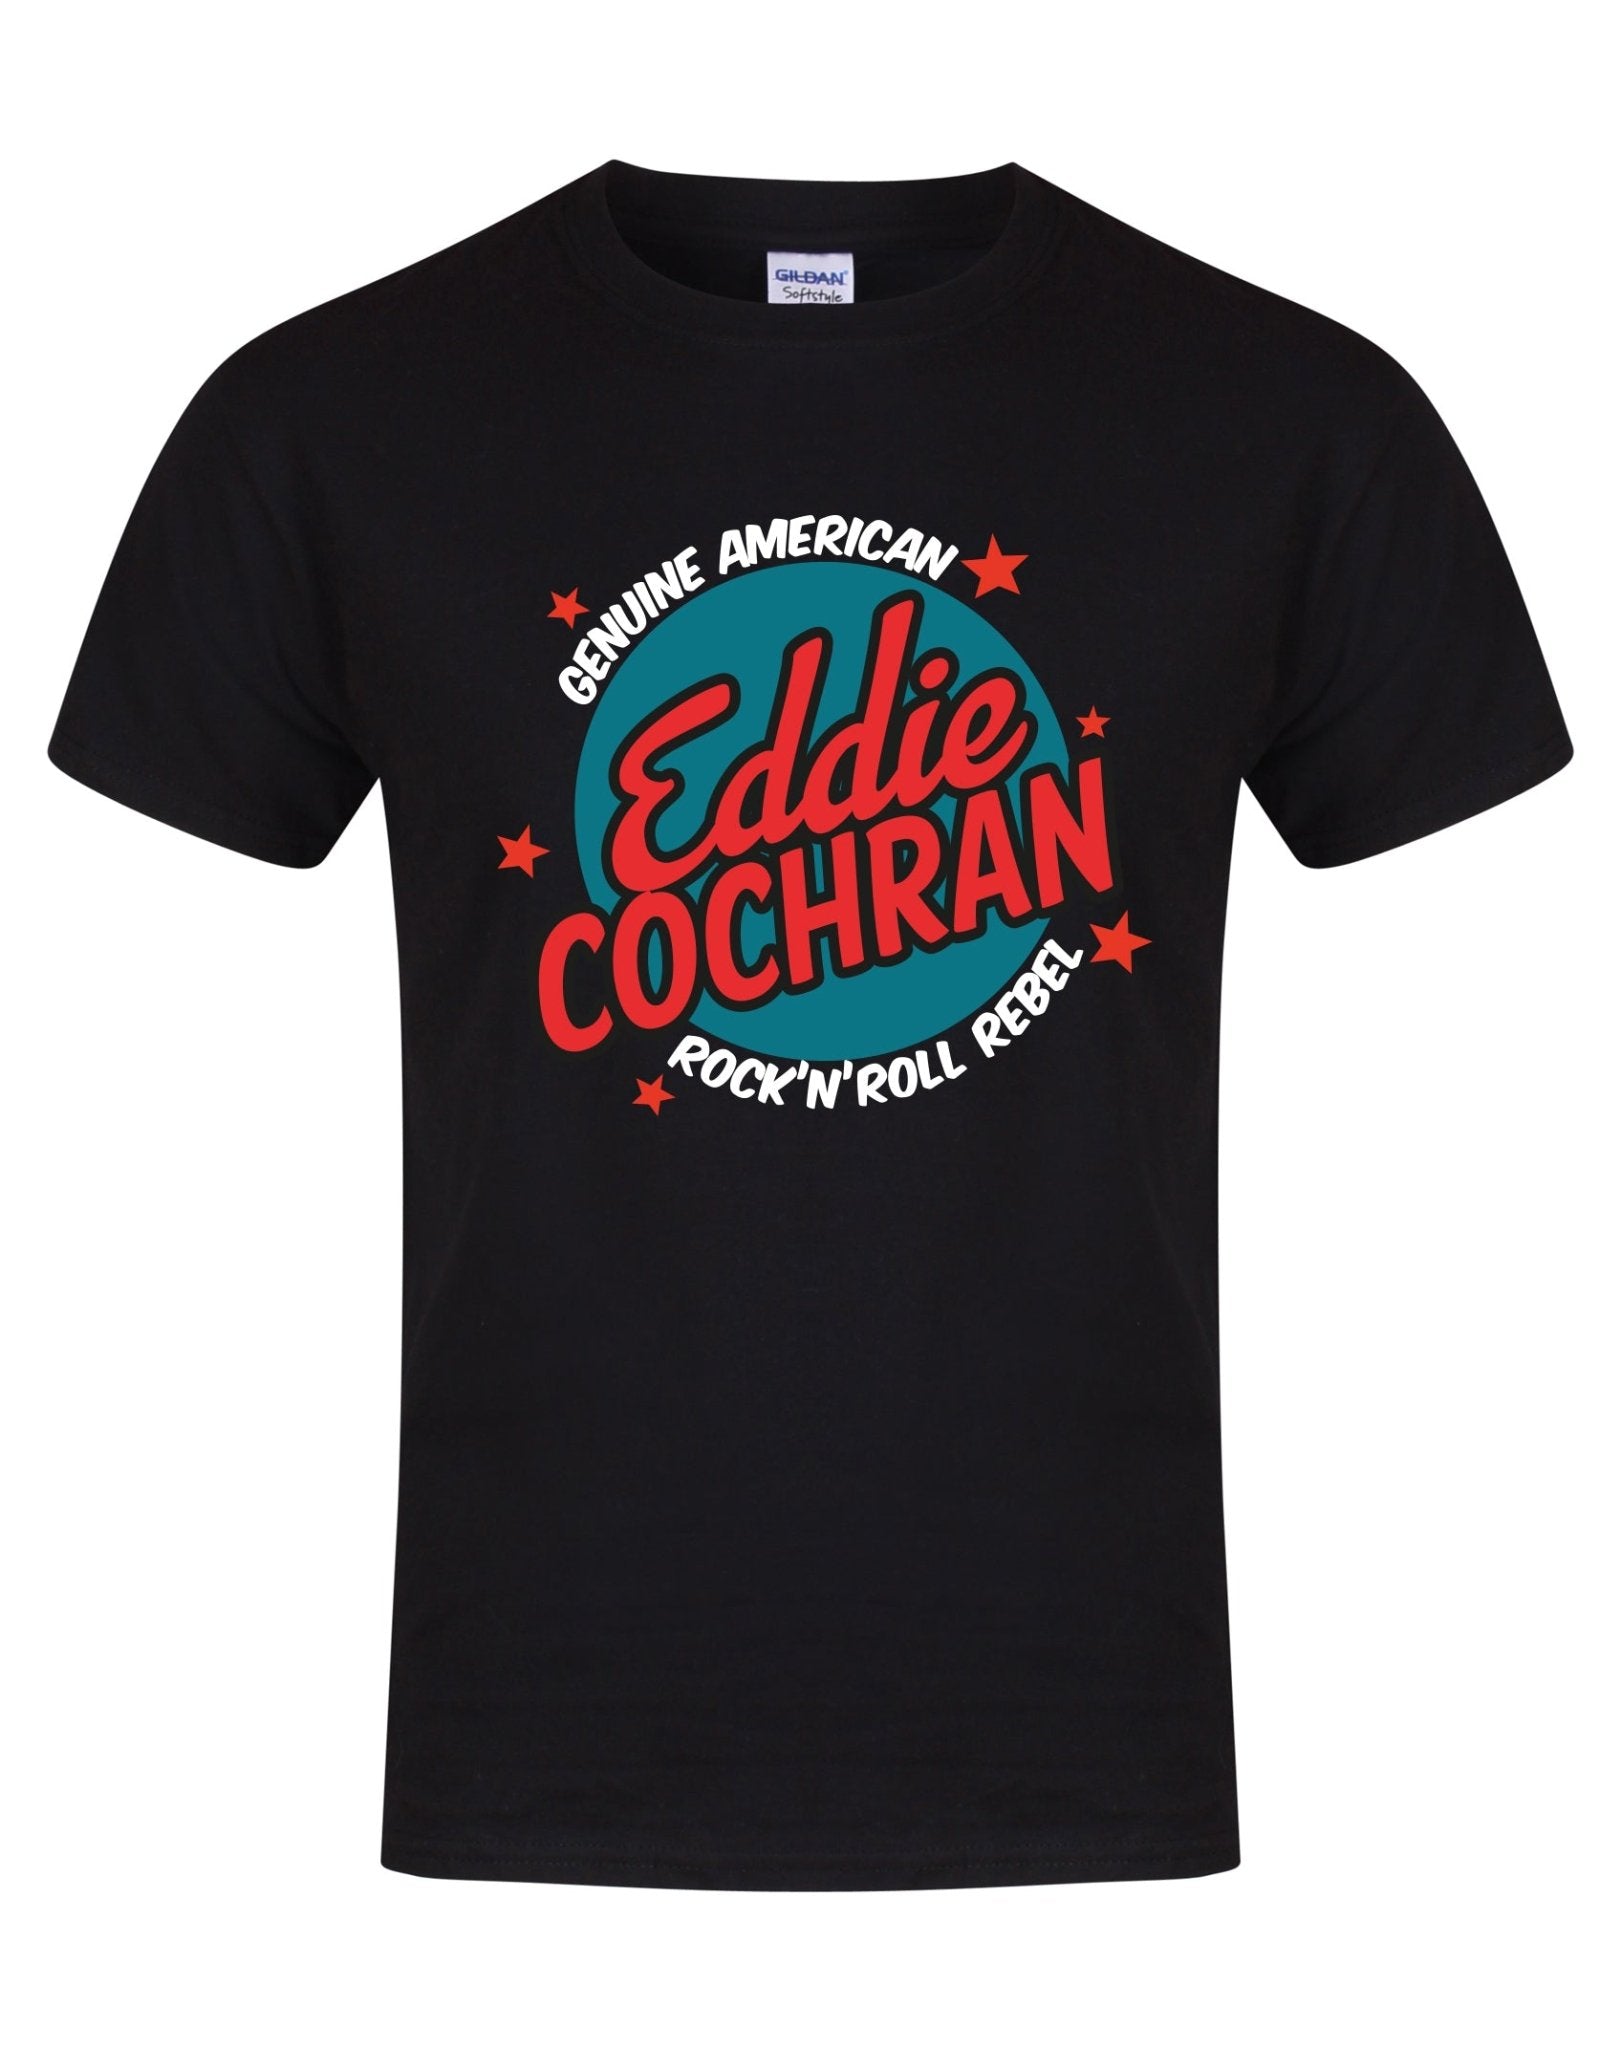 Eddie Cochran - rock'n'roll rebel - unisex fit T-shirt - various colours - Dirty Stop Outs